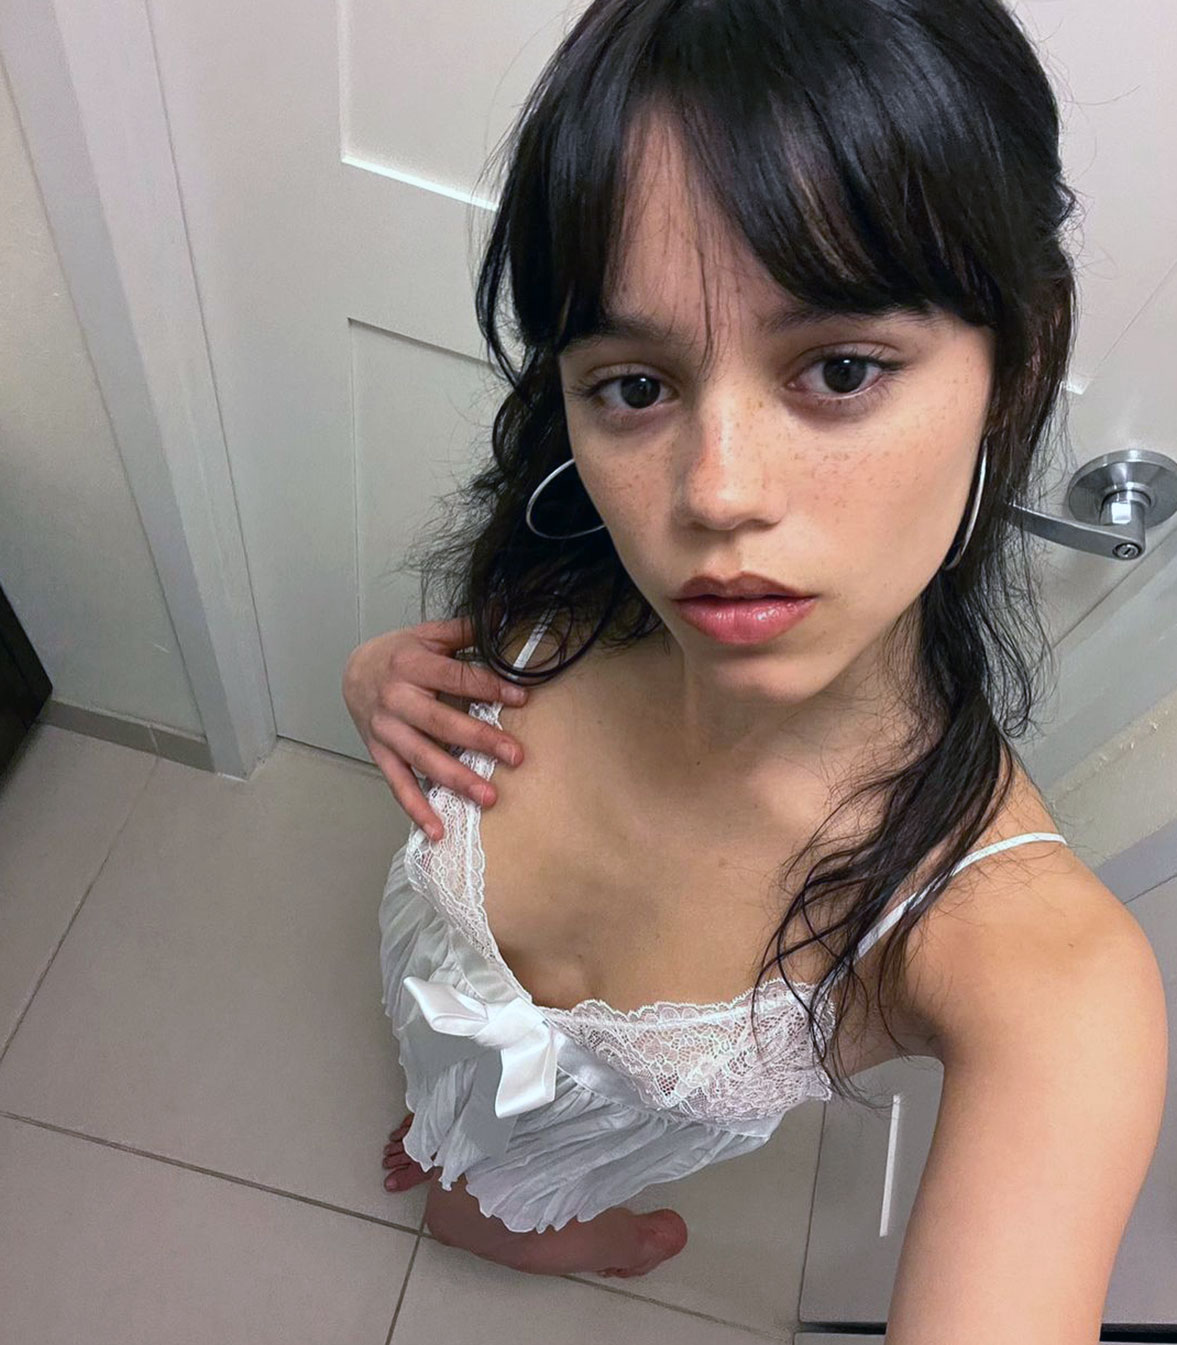 Vintage Actress Nudes No Fakes - Jenna Ortega Nude Photos and LEAKED Porn - Scandal Planet